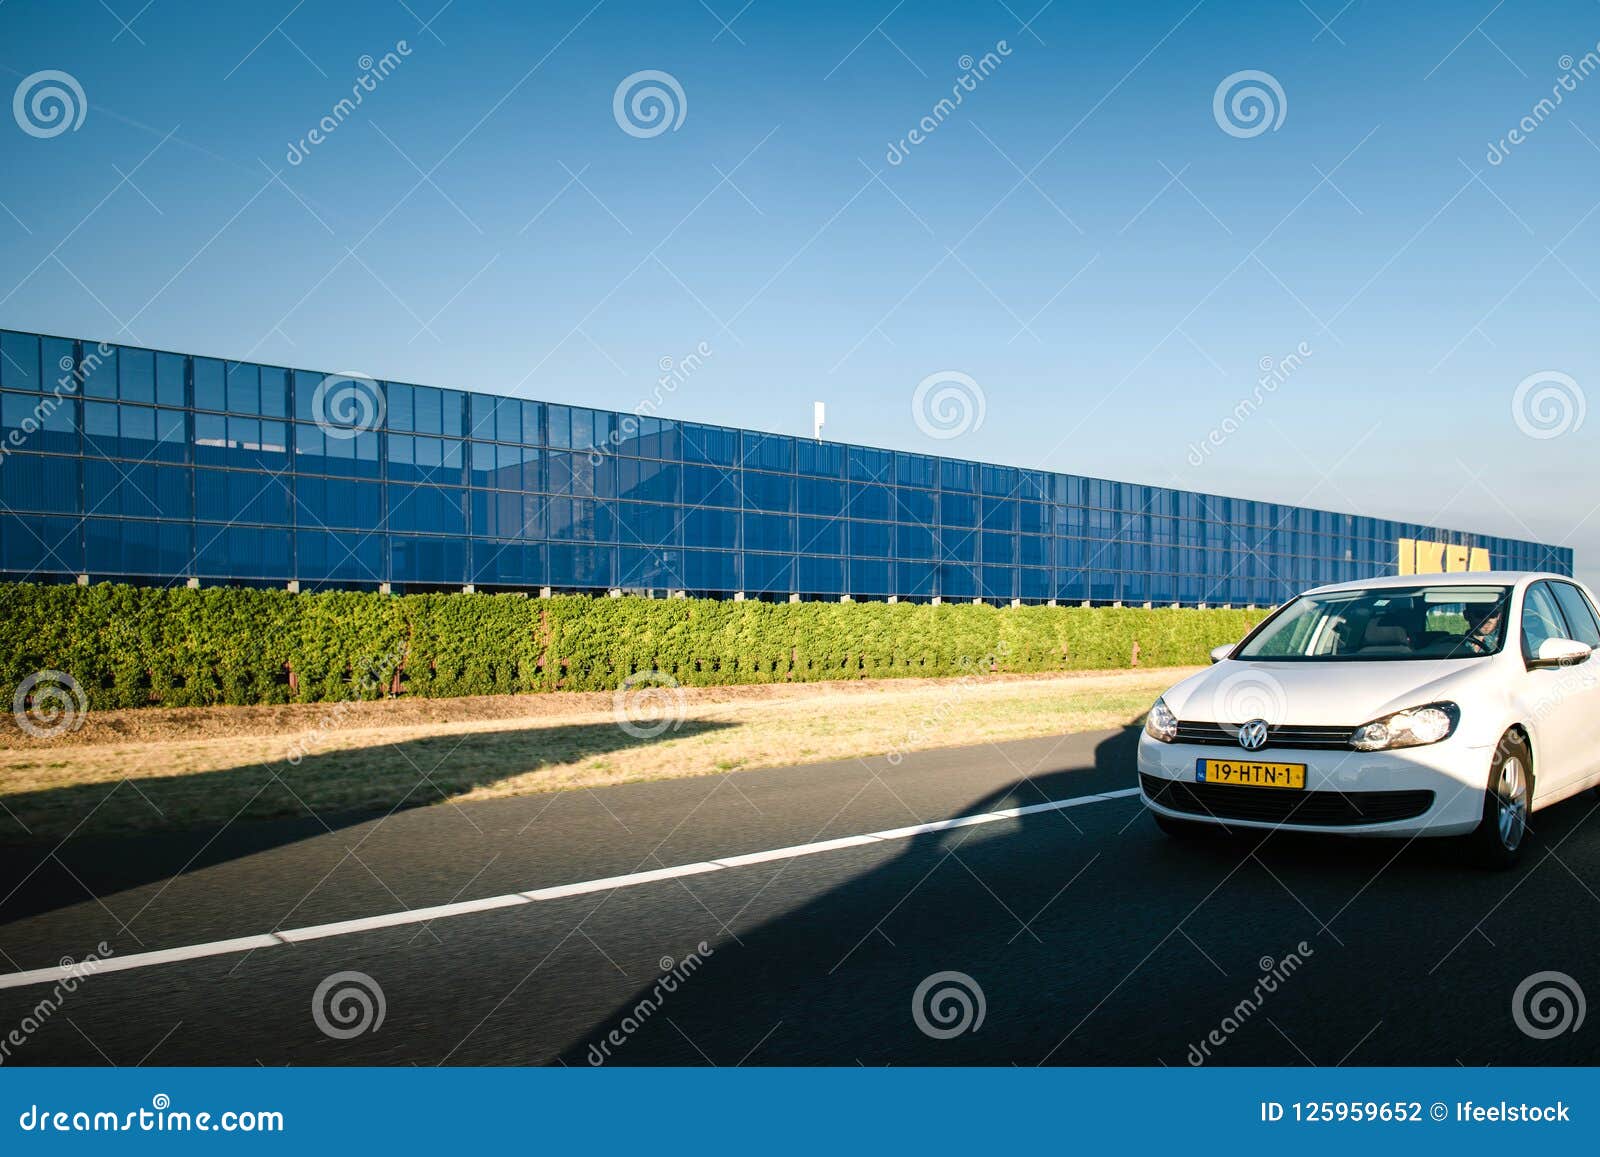 Ikea Furniture Store View From Dutch Highway Editorial Photography